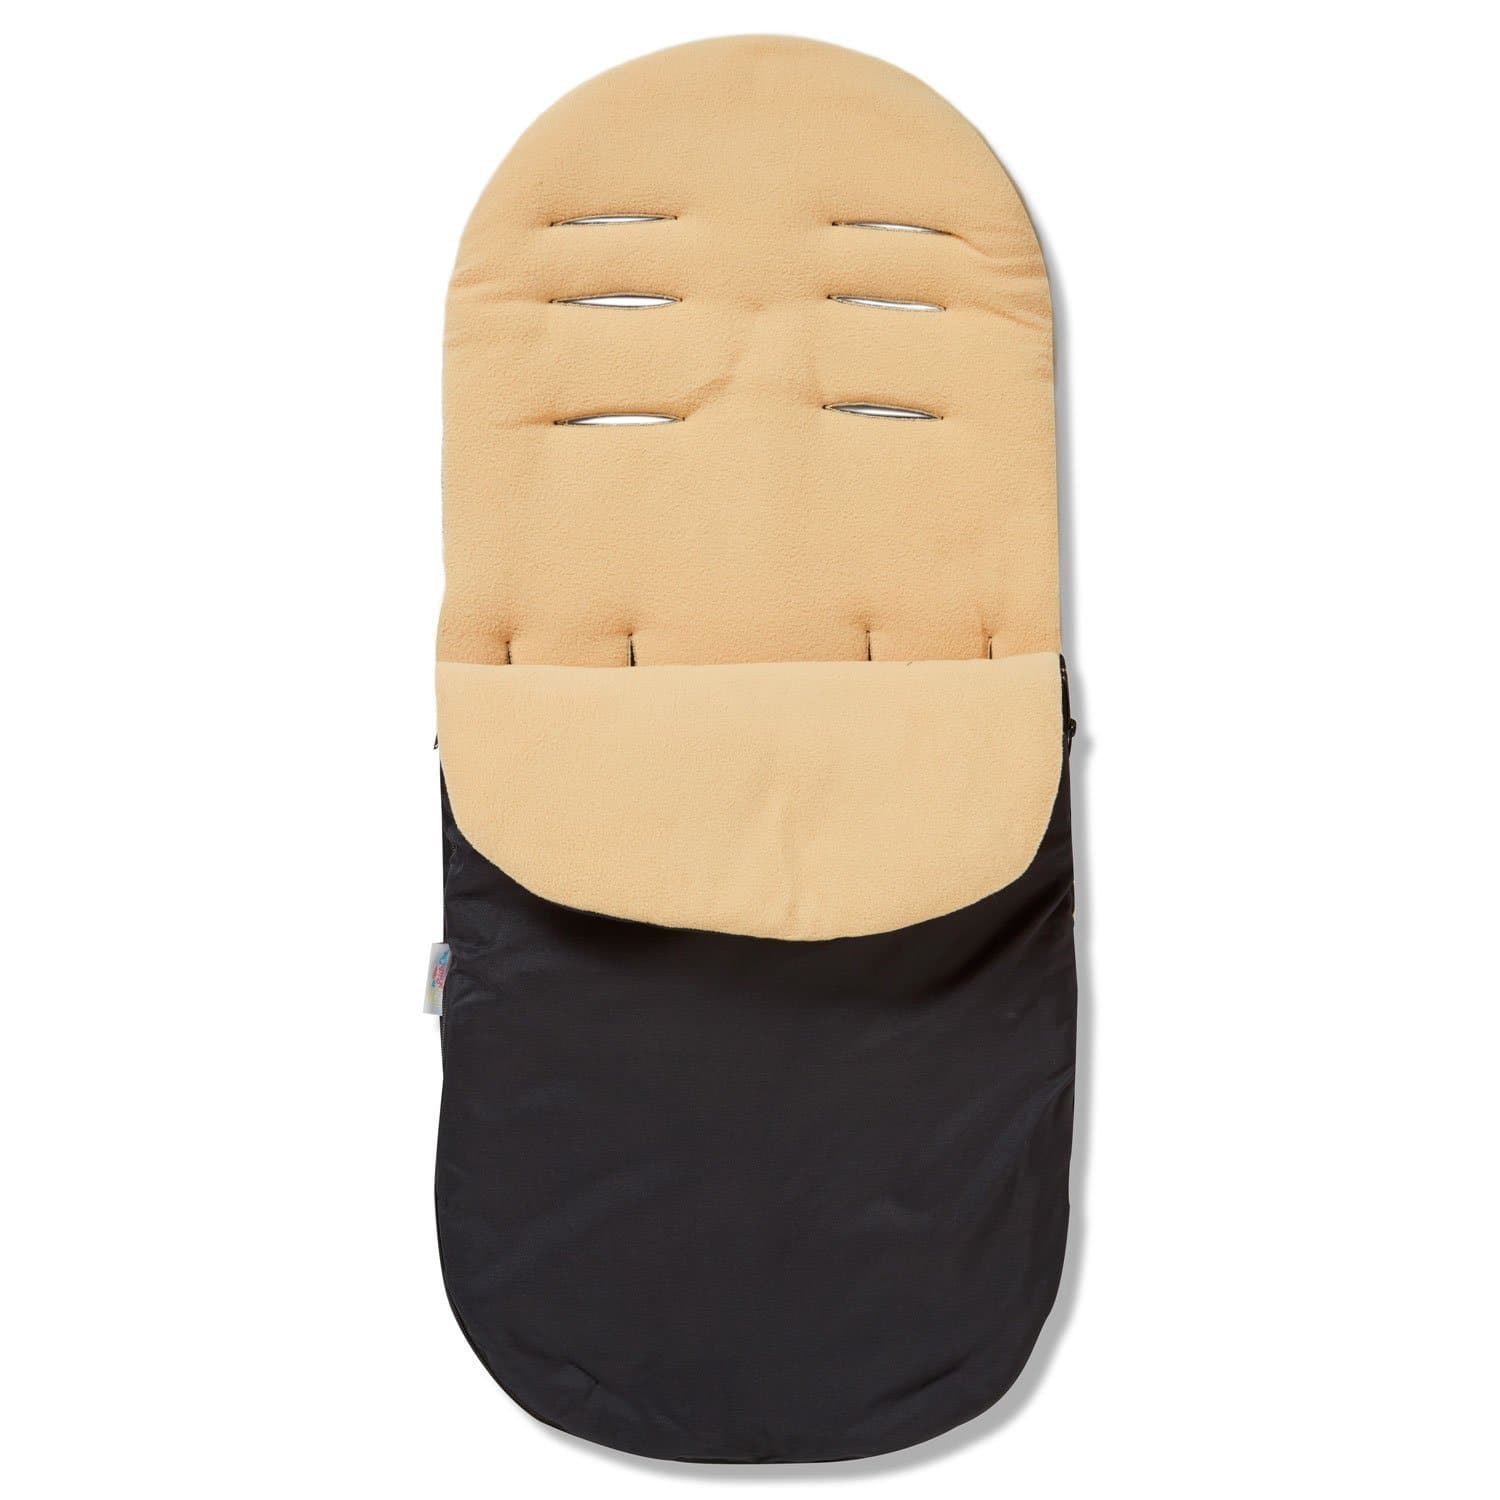 Footmuff / Cosy Toes Compatible with Britax - Sand / Fits All Models | For Your Little One